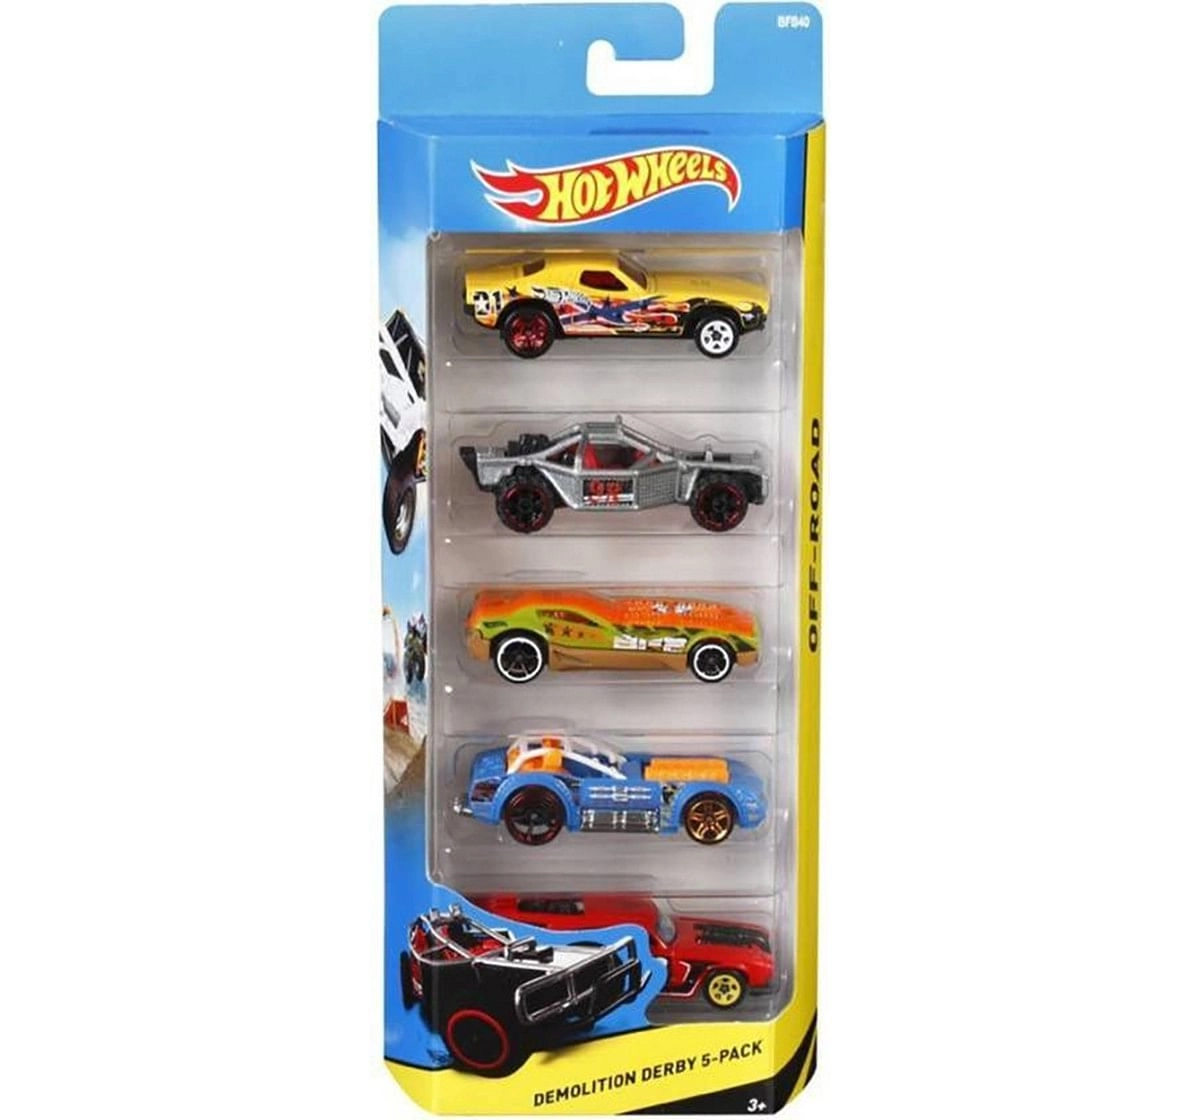 Hot Wheels Die Cast Cars Pack of 5 Vehicles for Kids, 3Y+, Assorted